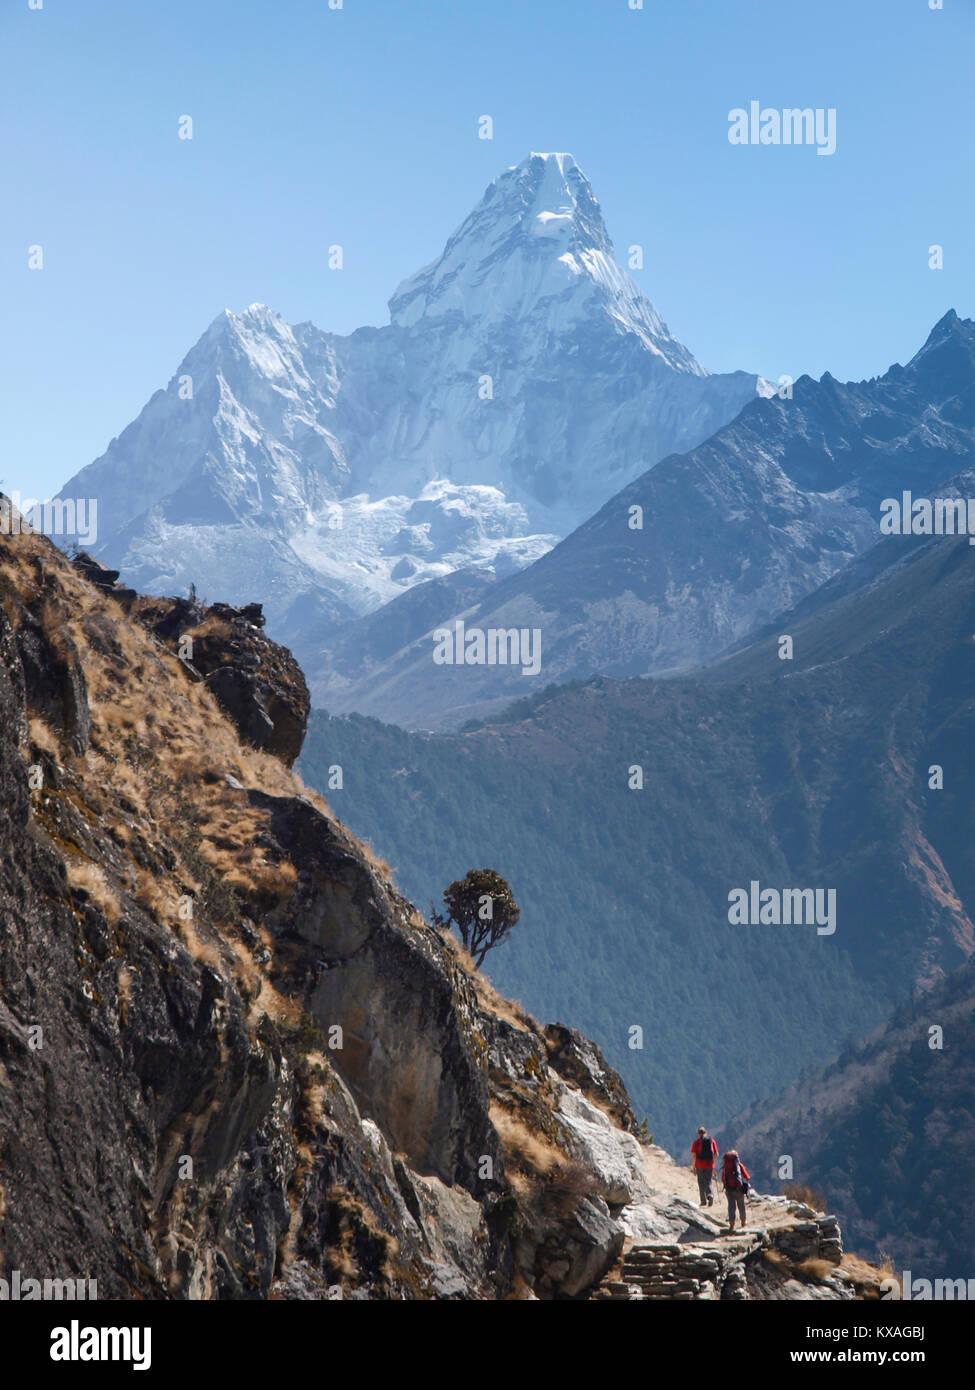 Hikers in front of Ama Dablam on their way to Everest Base Camp in Khumbu valley, Lukla, Nepal Stock Photo